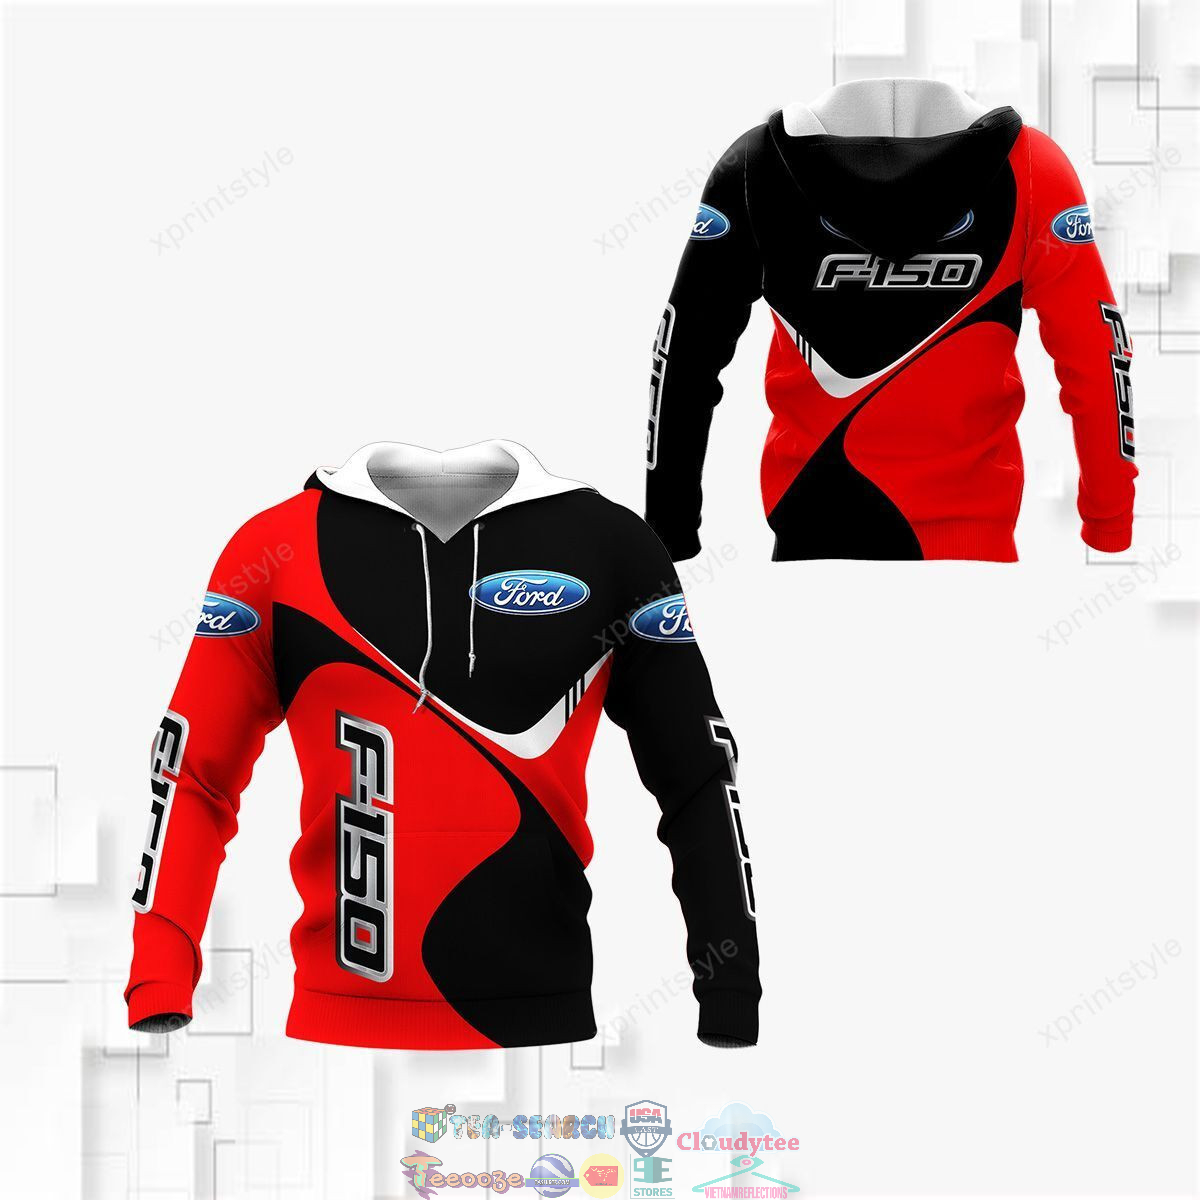 Ford F150 ver 5 hoodie and t-shirt – Saleoff